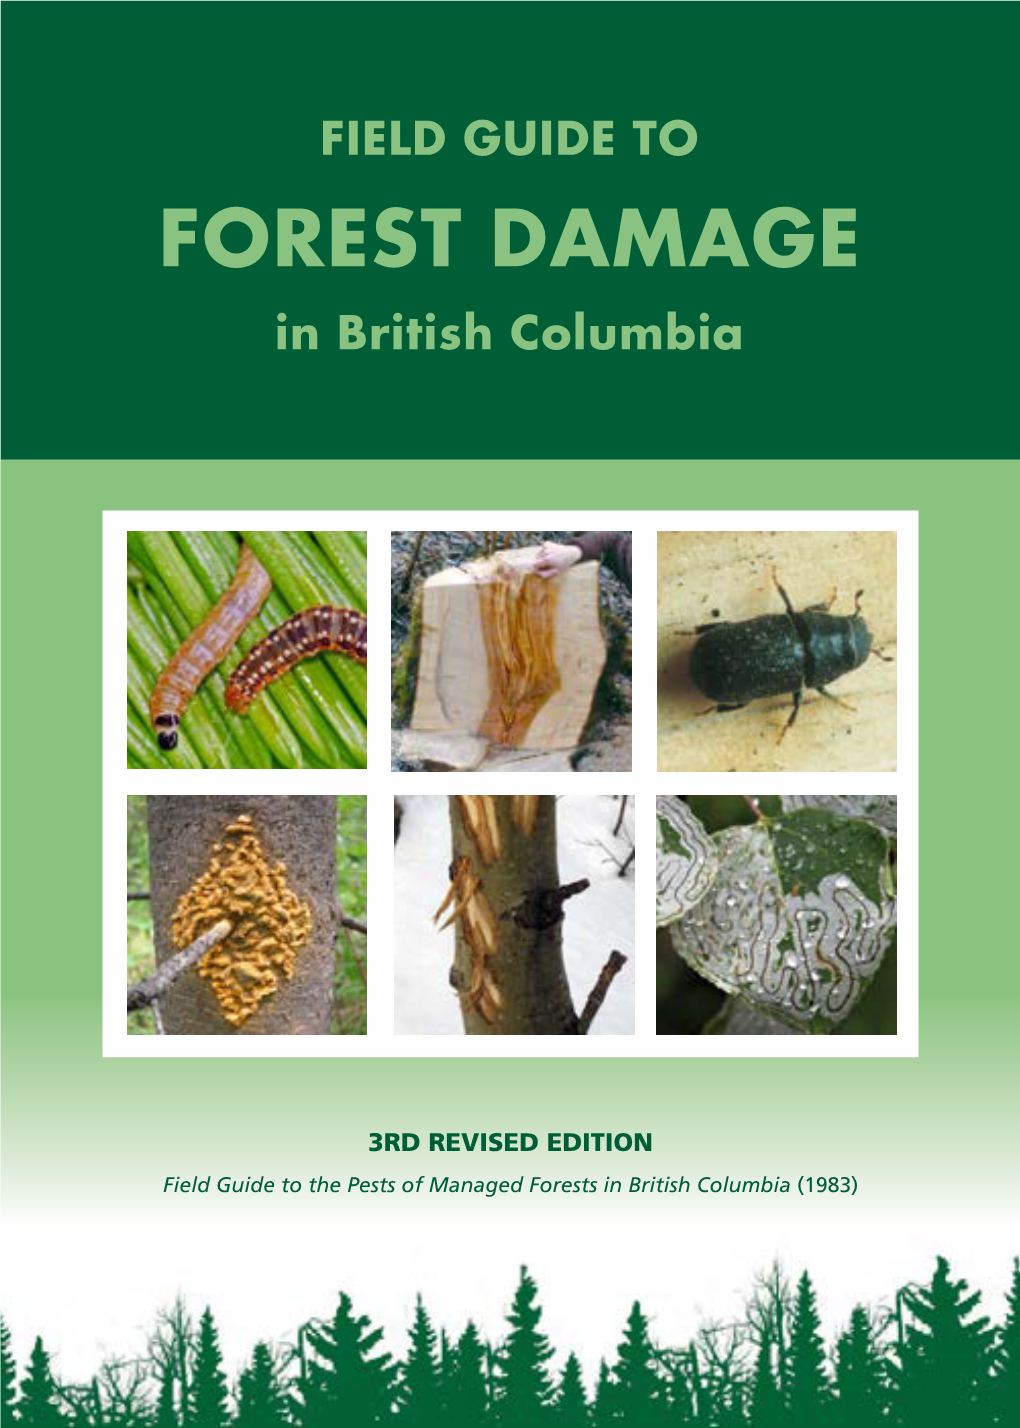 FIELD GUIDE to FOREST DAMAGE in British Columbia